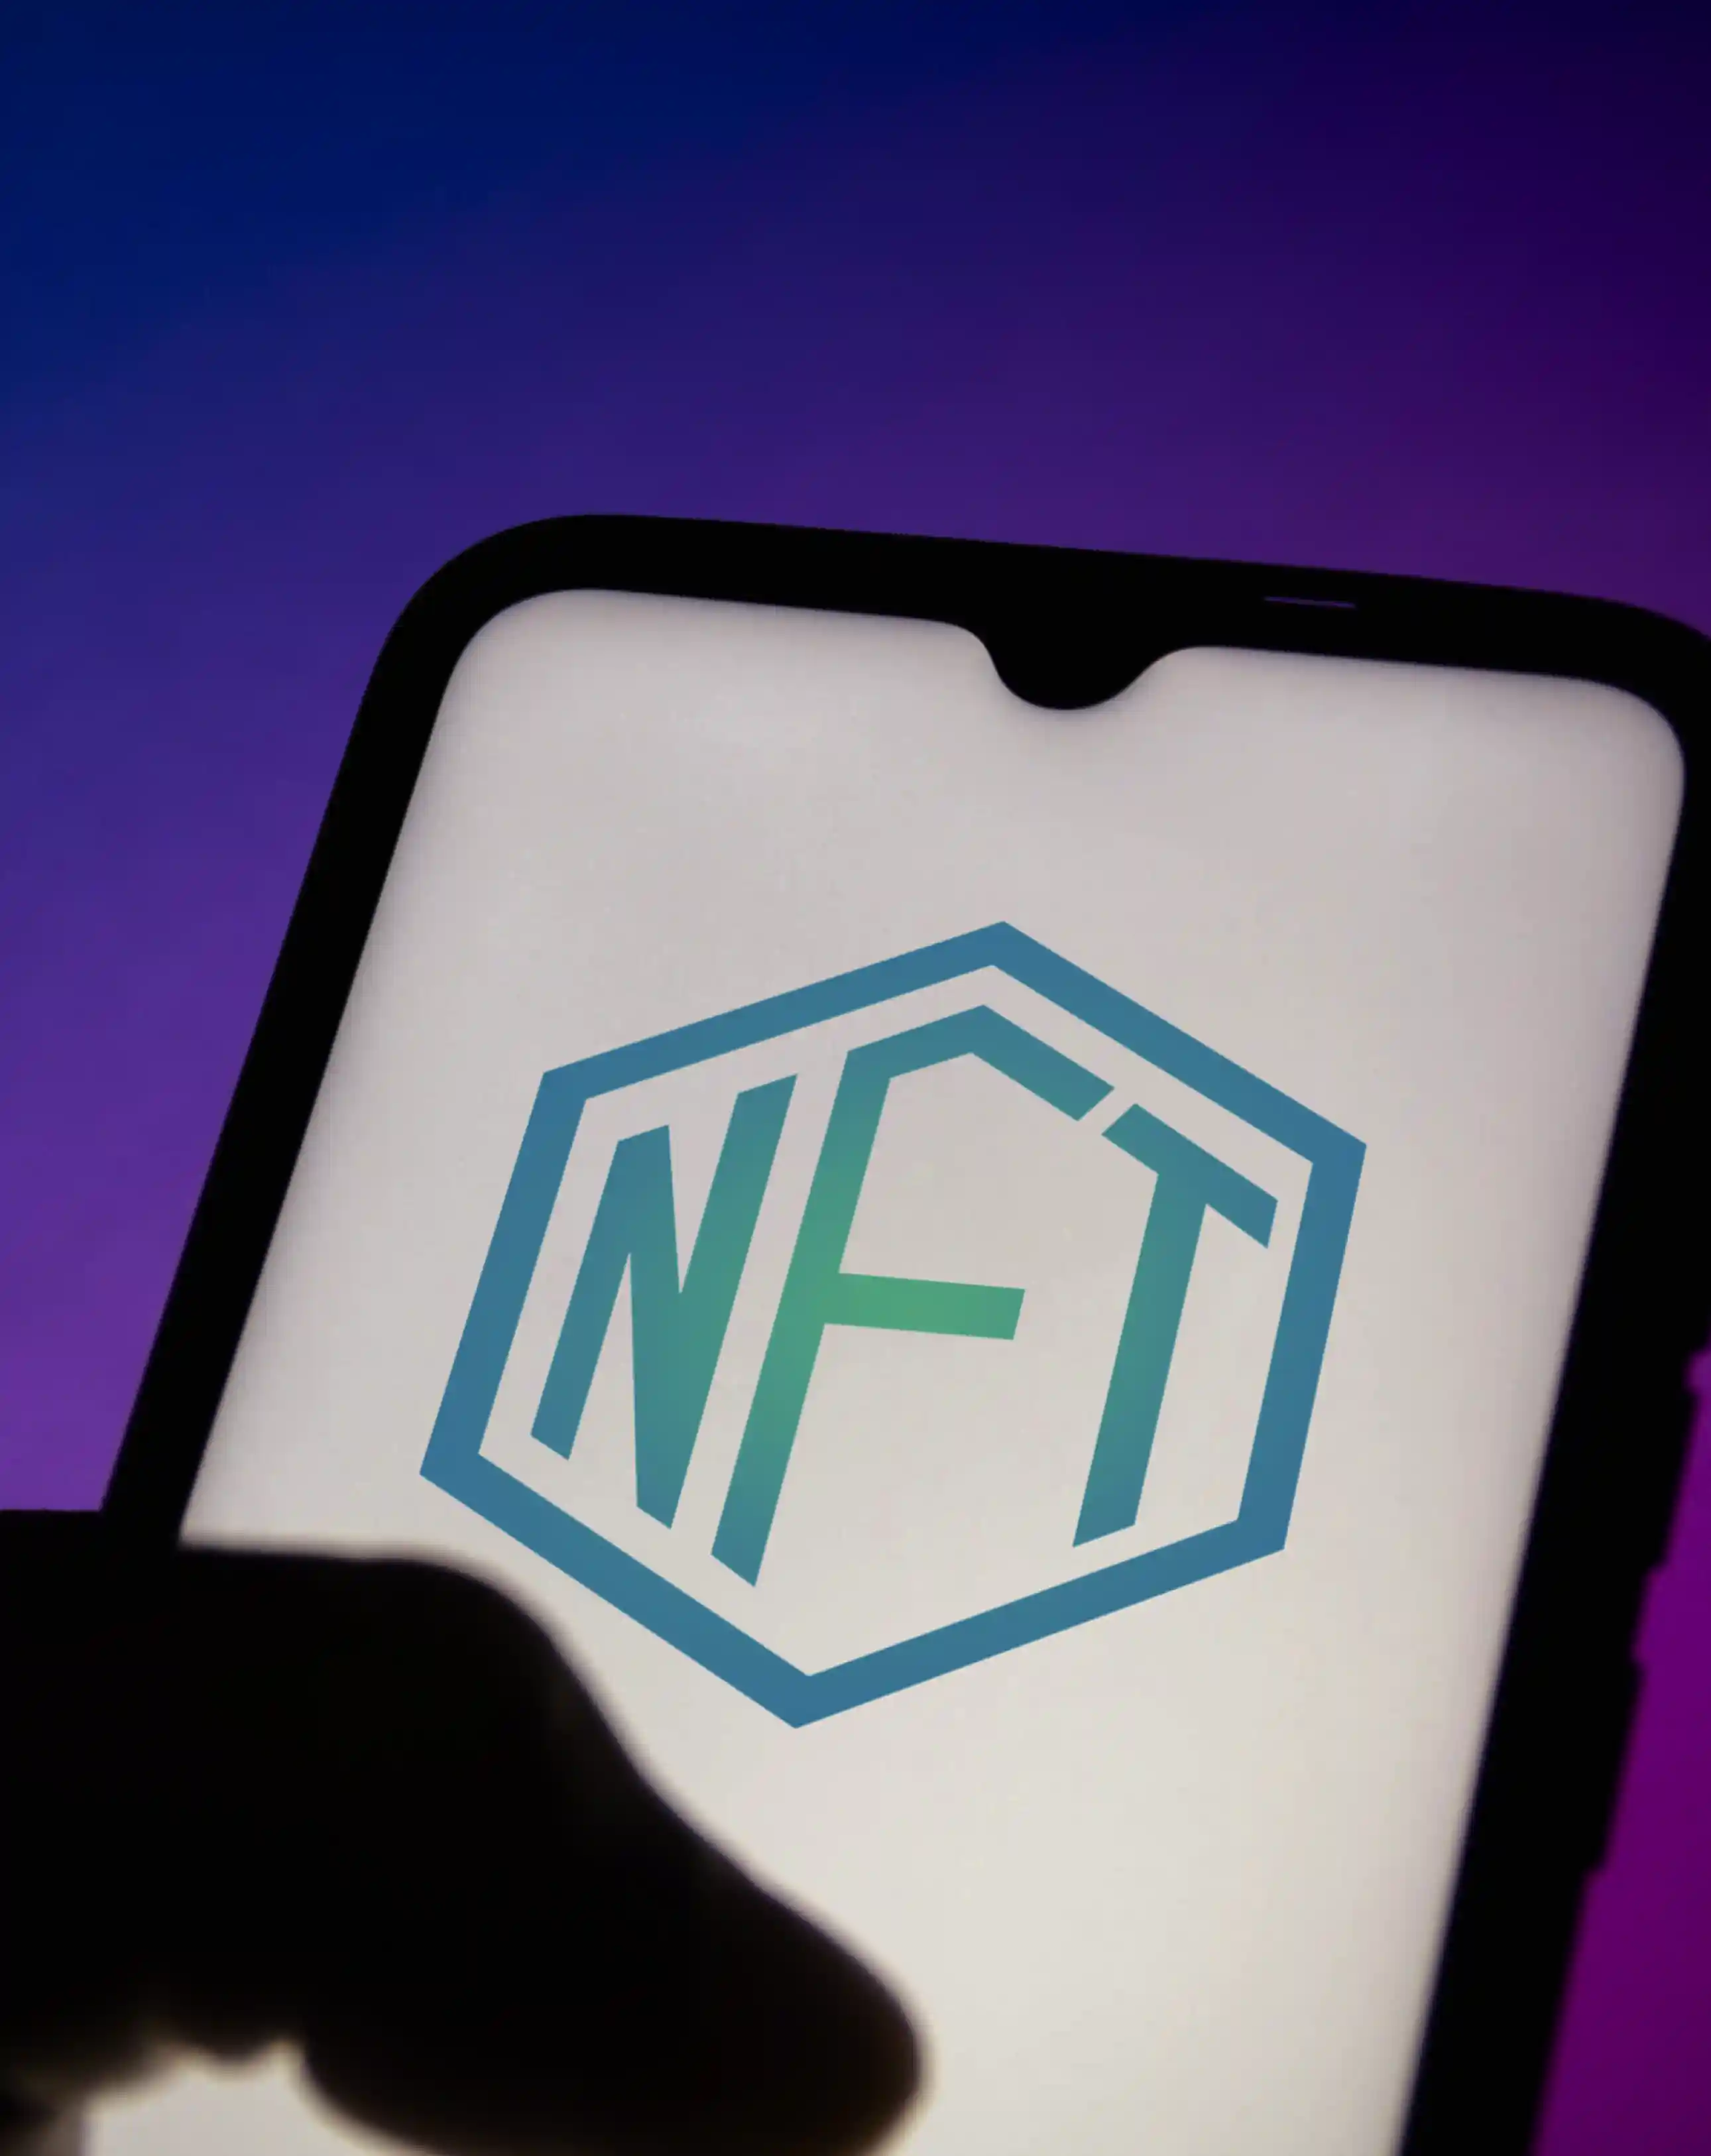 Developed a CMS module for a news website to showcase NFTs and their details